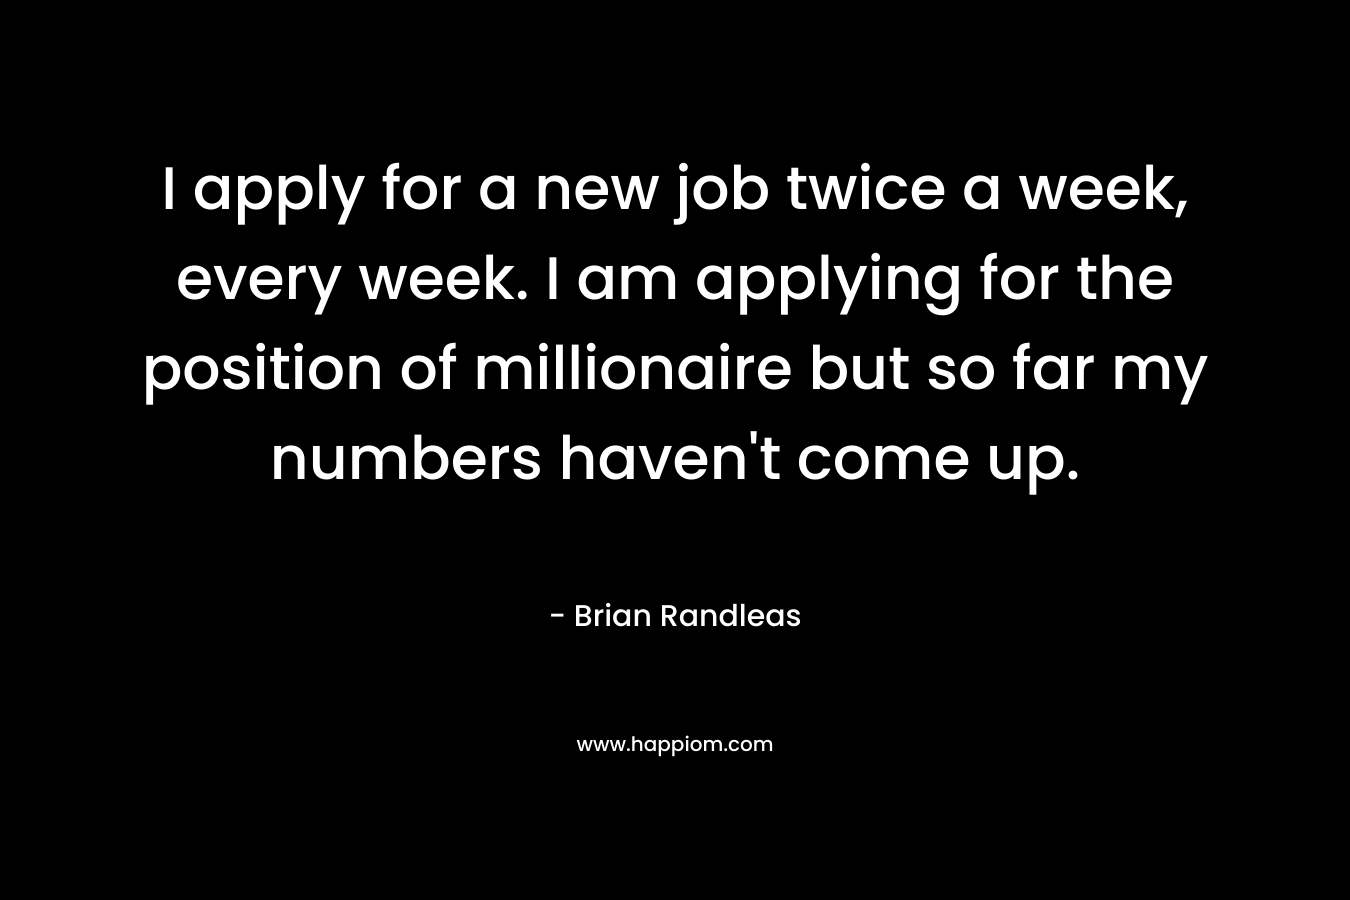 I apply for a new job twice a week, every week. I am applying for the position of millionaire but so far my numbers haven’t come up. – Brian Randleas